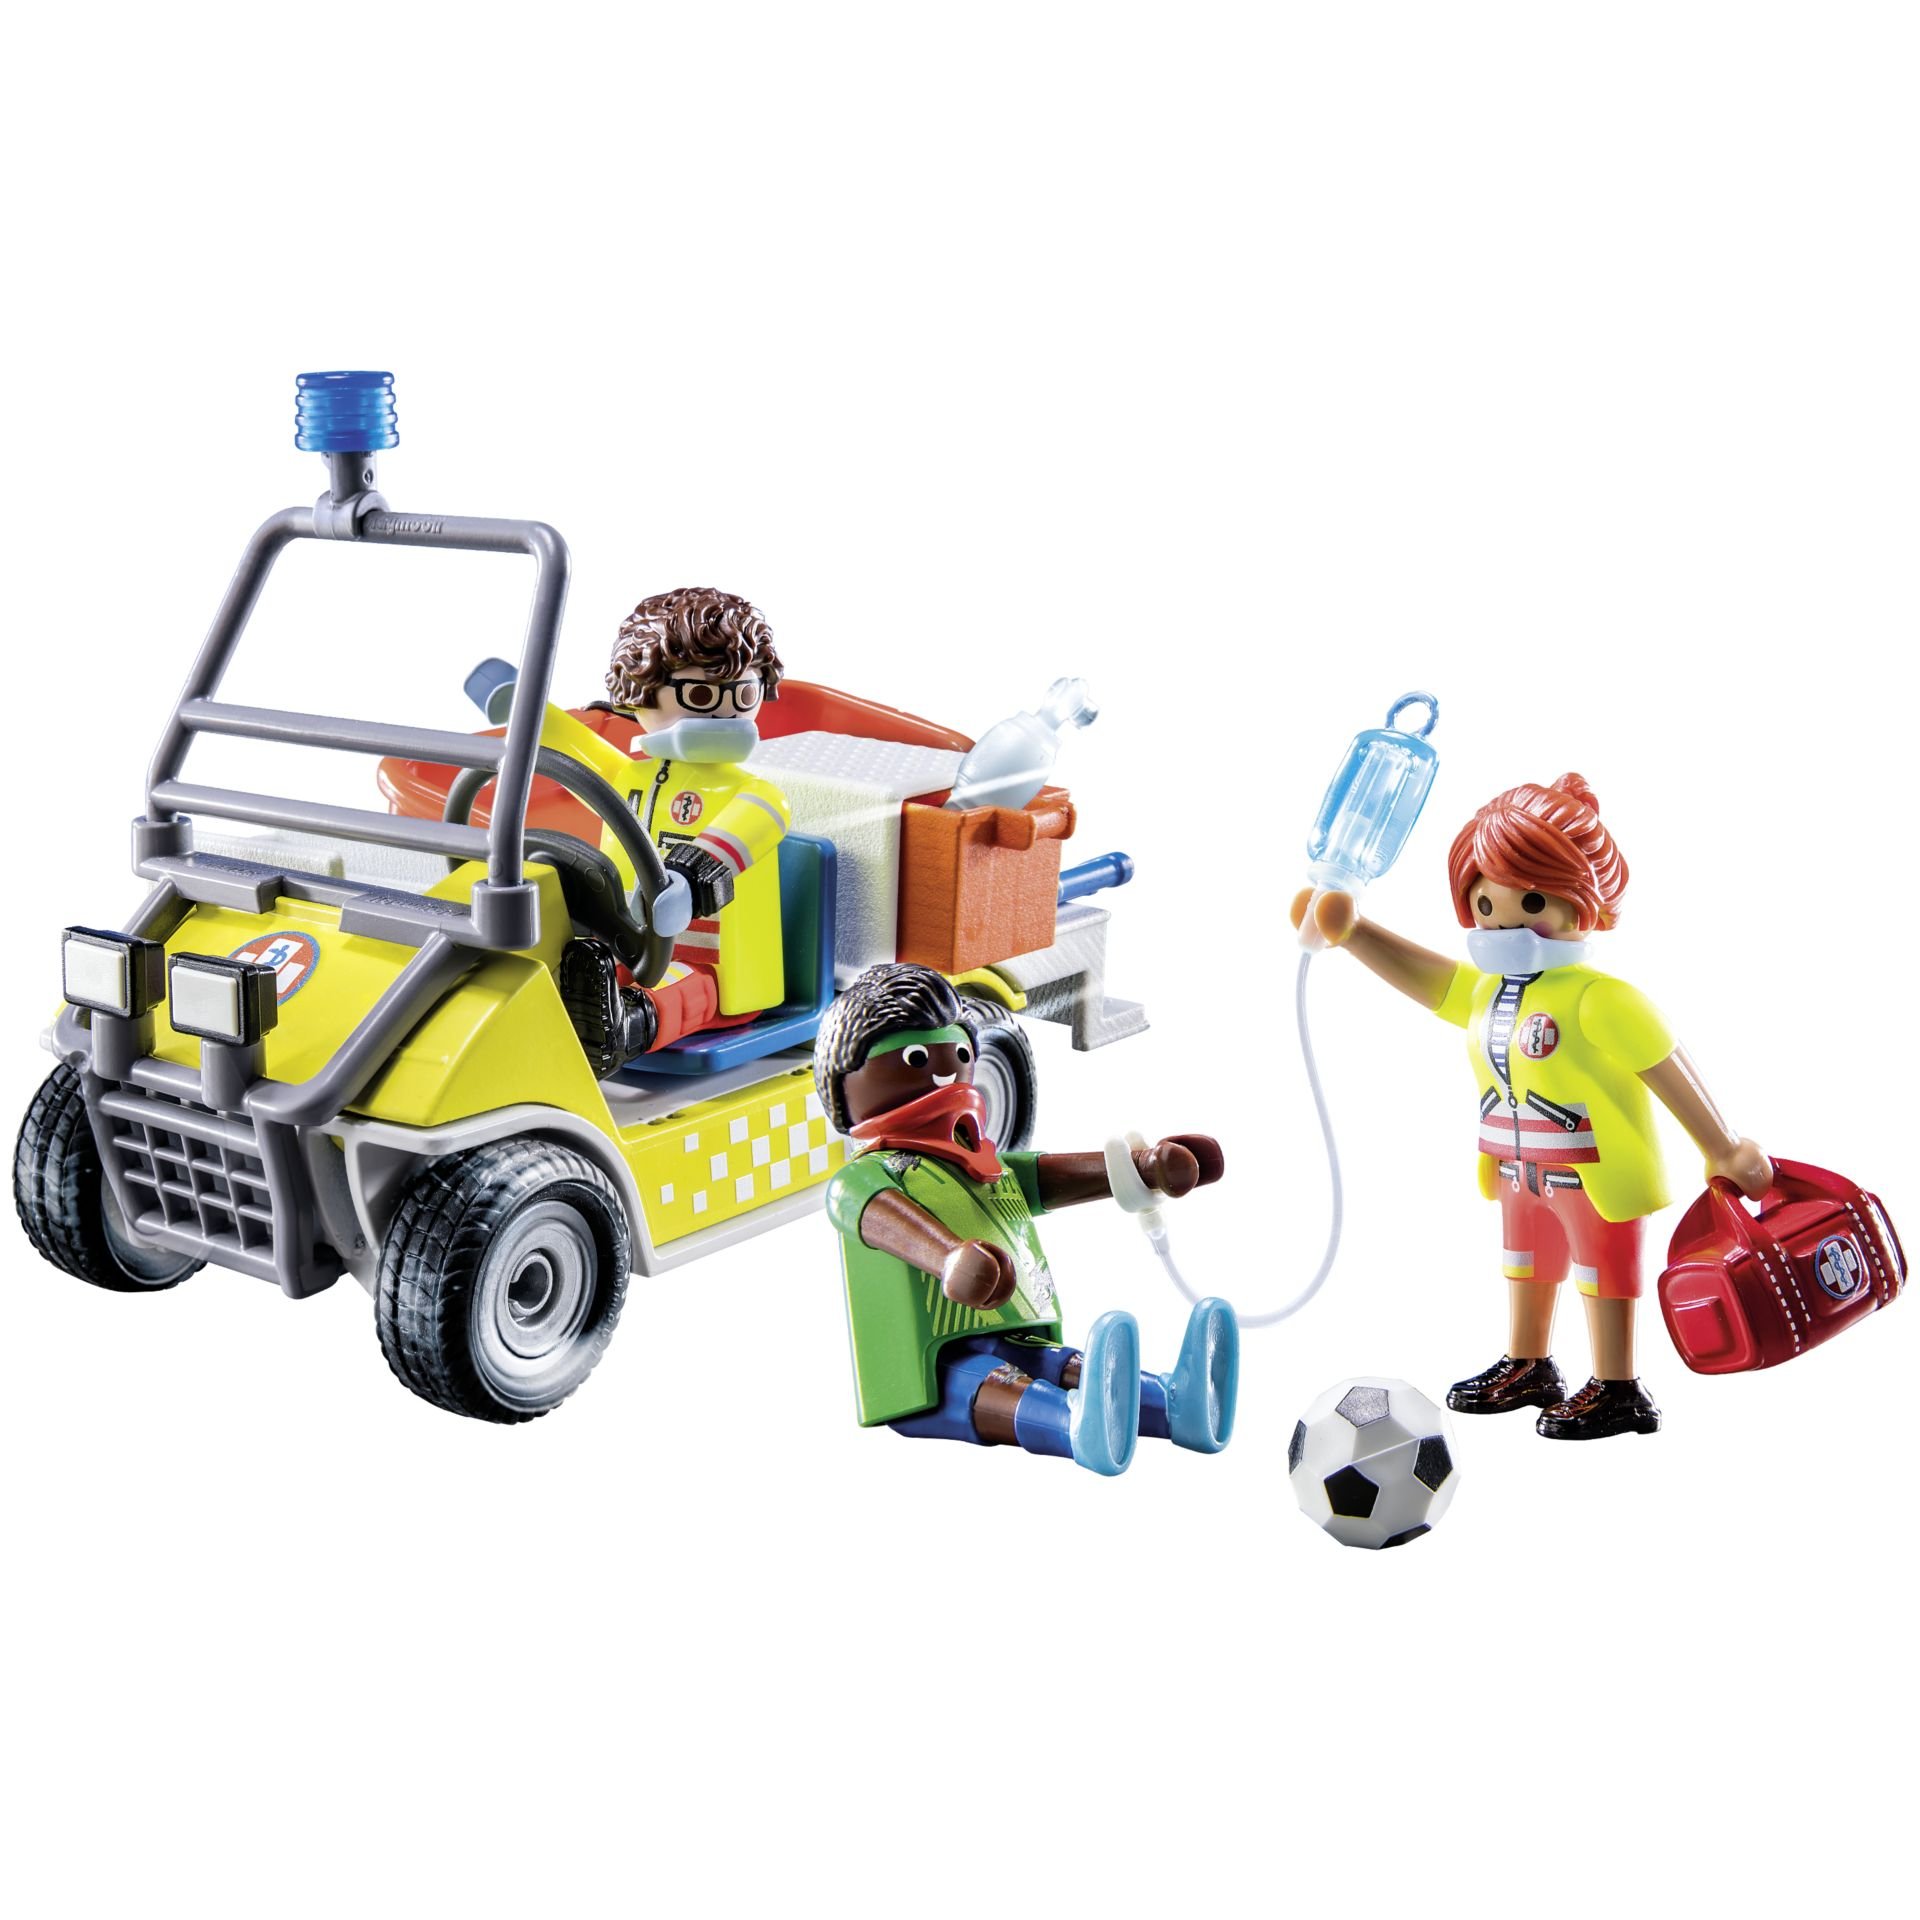 PLAYMOBIL City Life 71204 Rescue Caddy